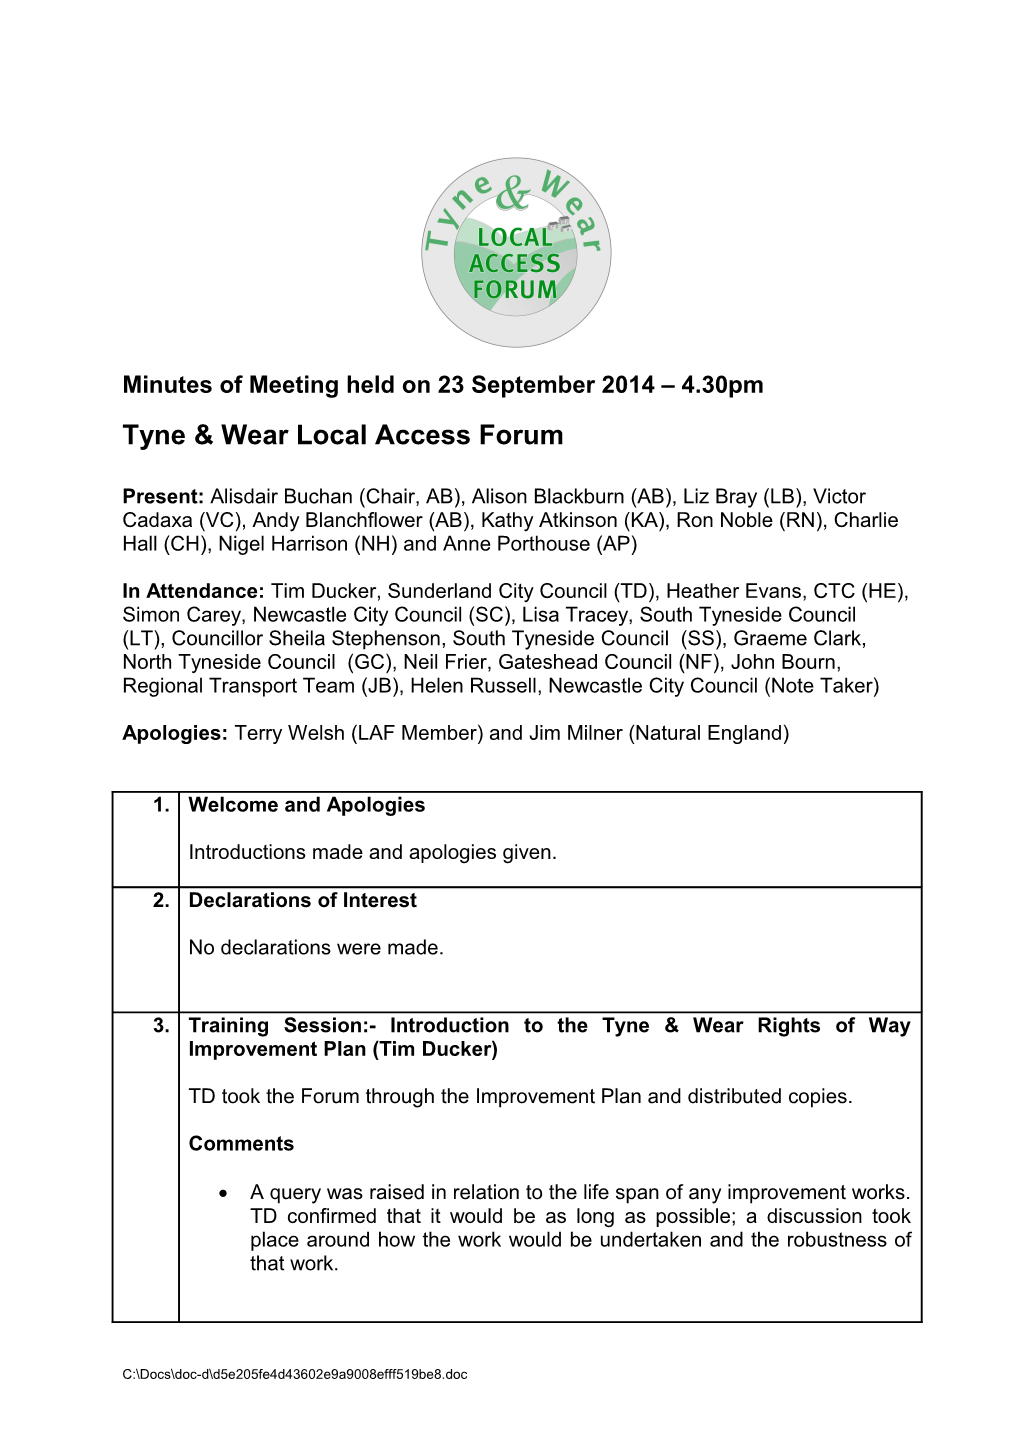 Minutes of Meeting Held on 23 September 2014 4.30Pm